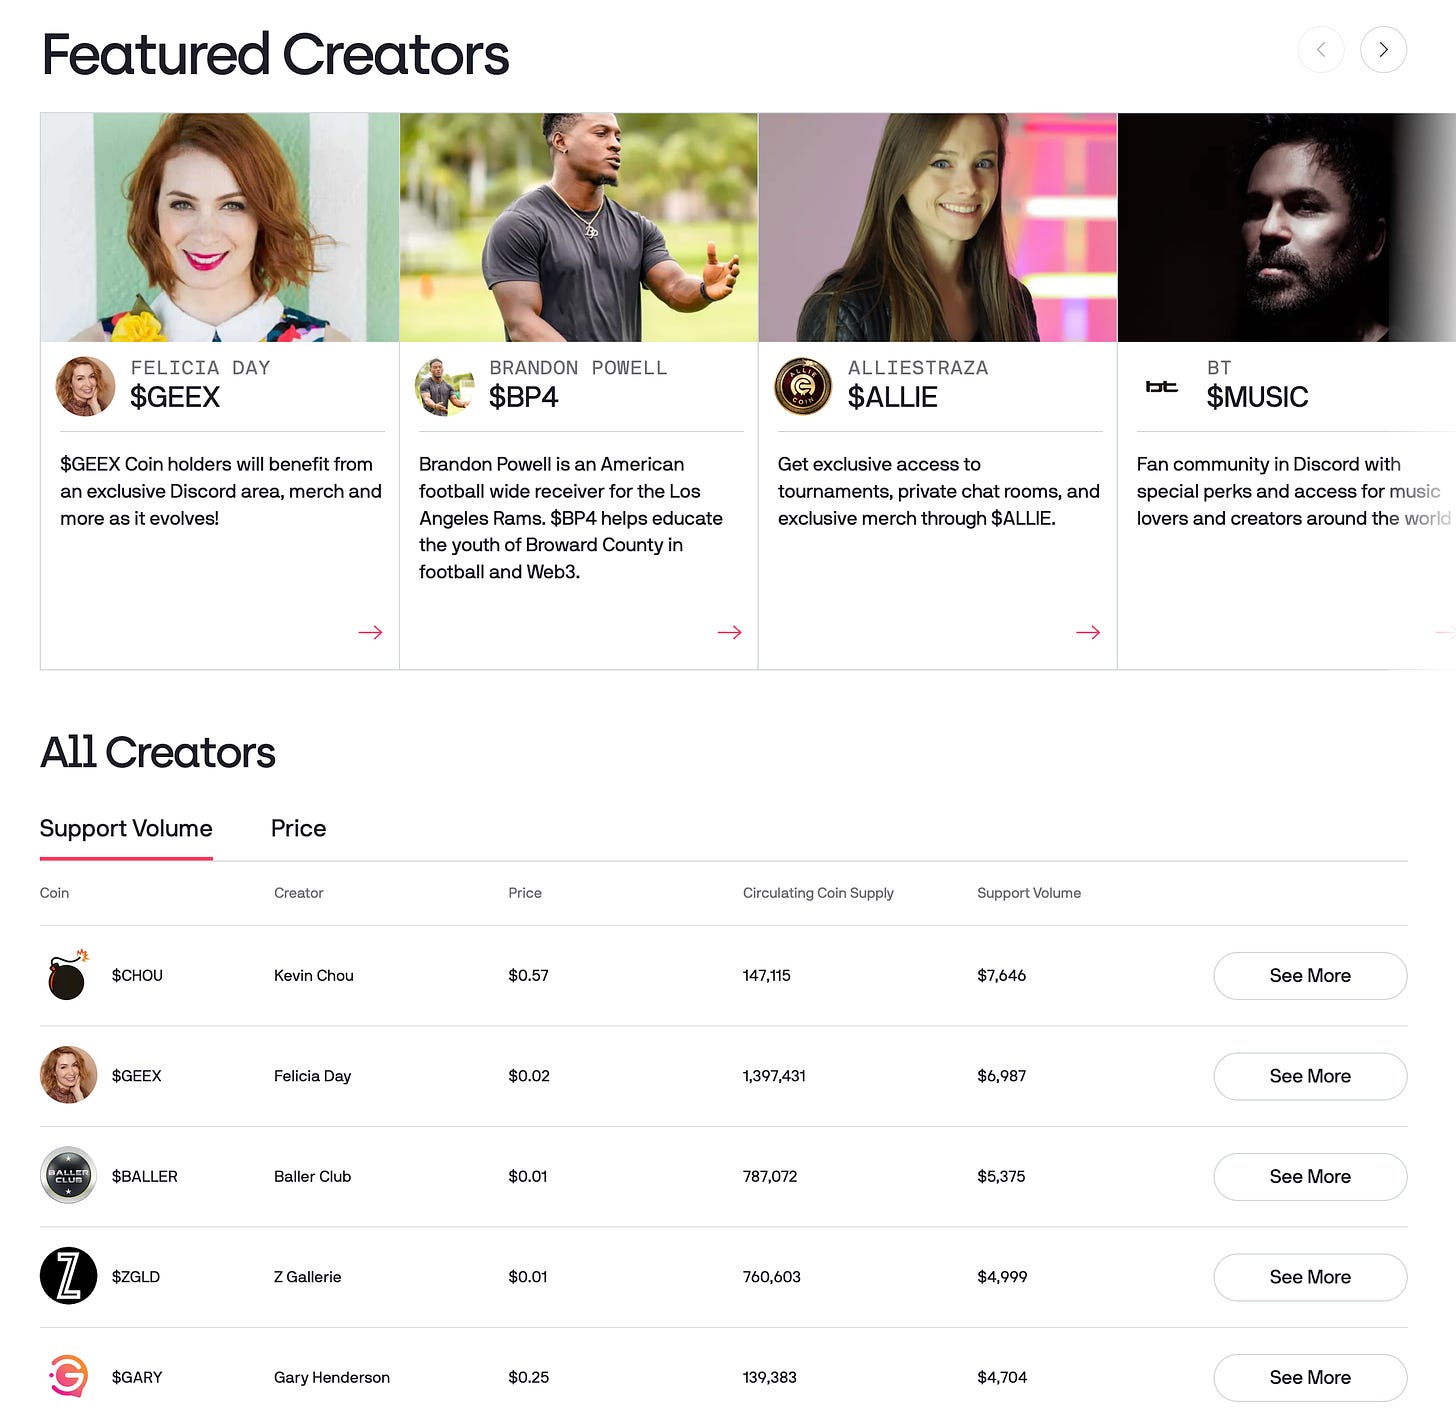 Screenshot of Rally.io, showing "Featured Creators" Felicia Day, Brandon Powell, Alliestraza, and BT. Below that is a list of all creators.